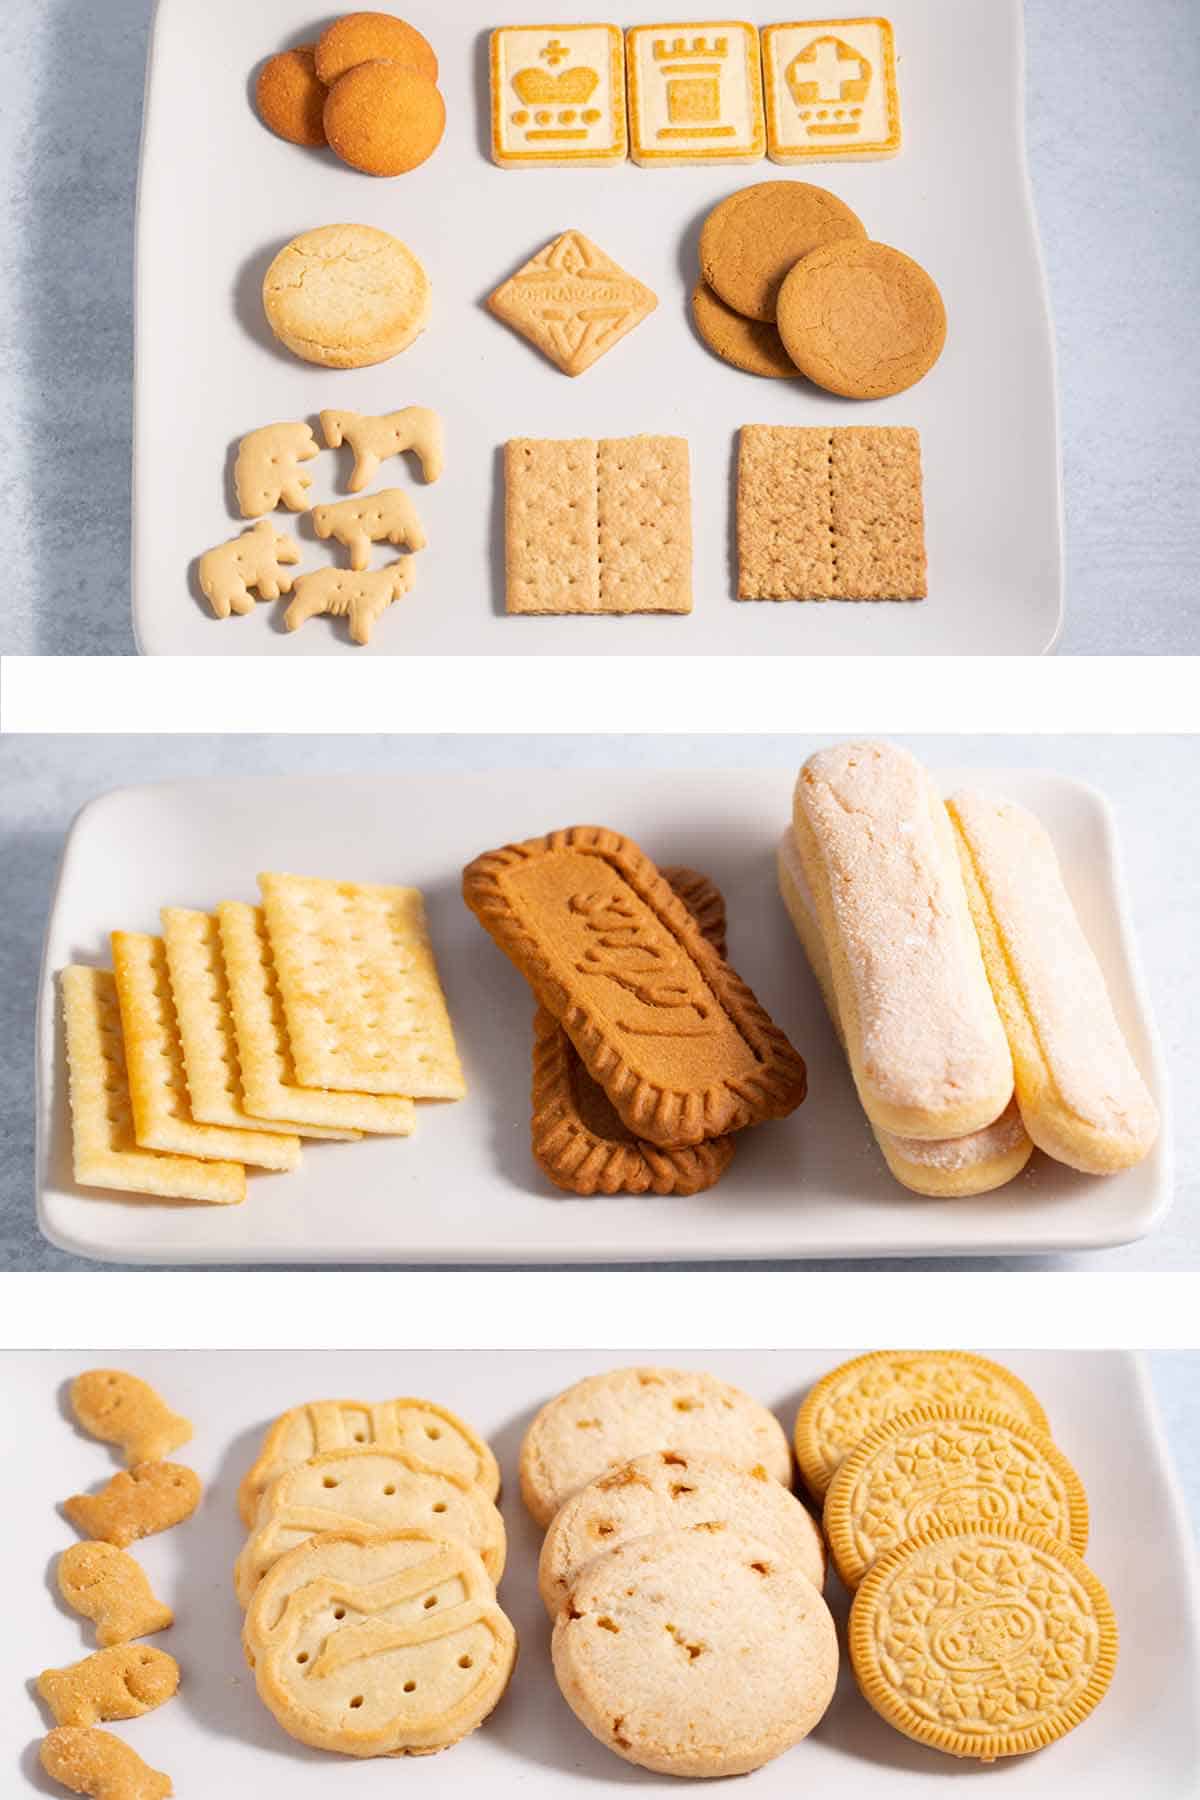 Plates with piles of cookies for banana pudding. 15 cookies or crackers are shown.